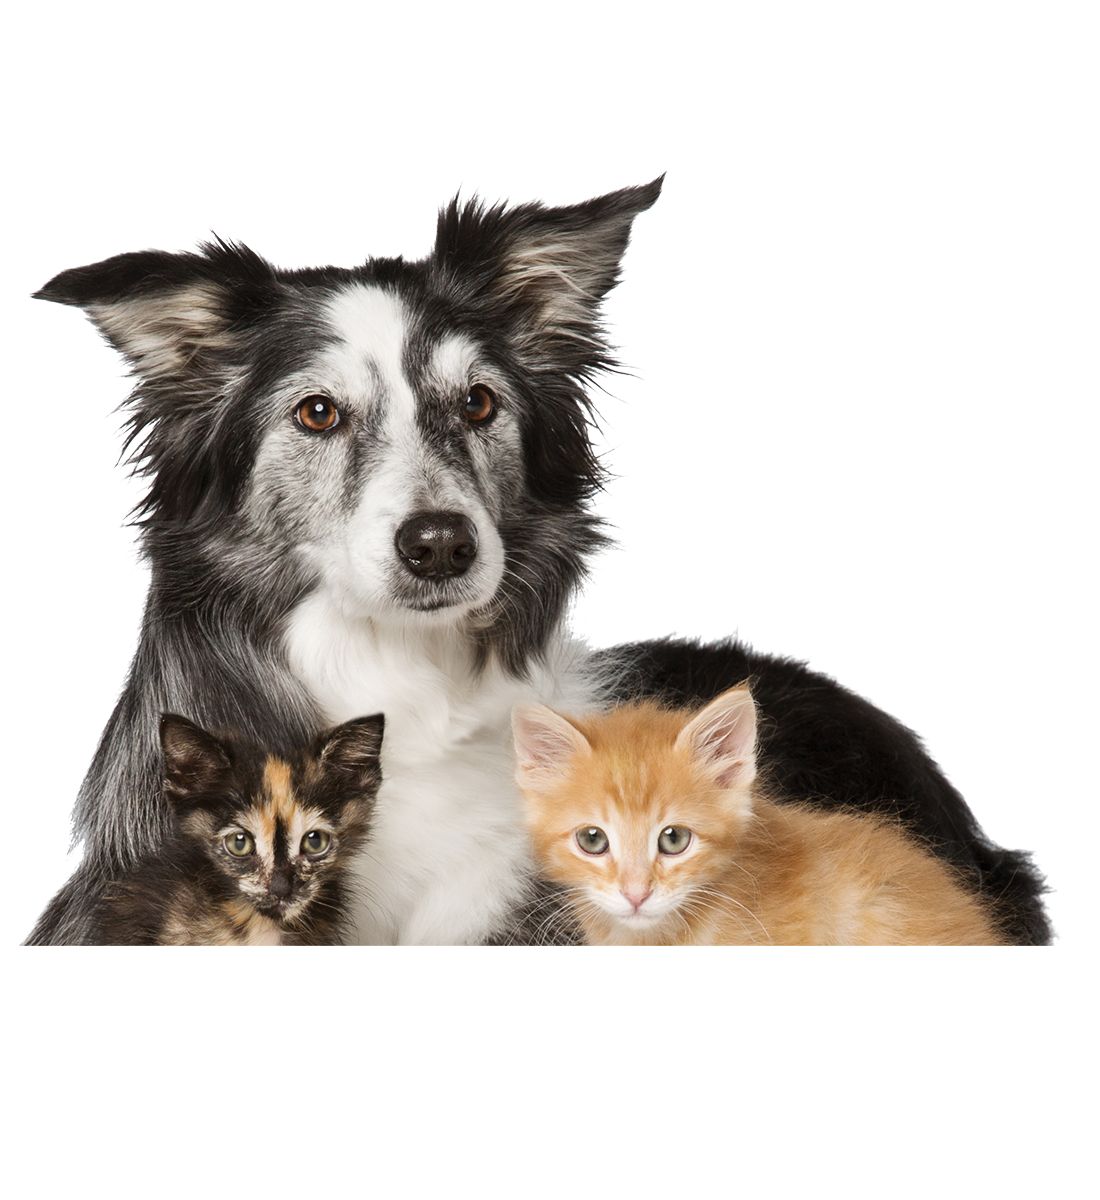 Cats and Dogs for Adoption: PetSmart Saves Lives